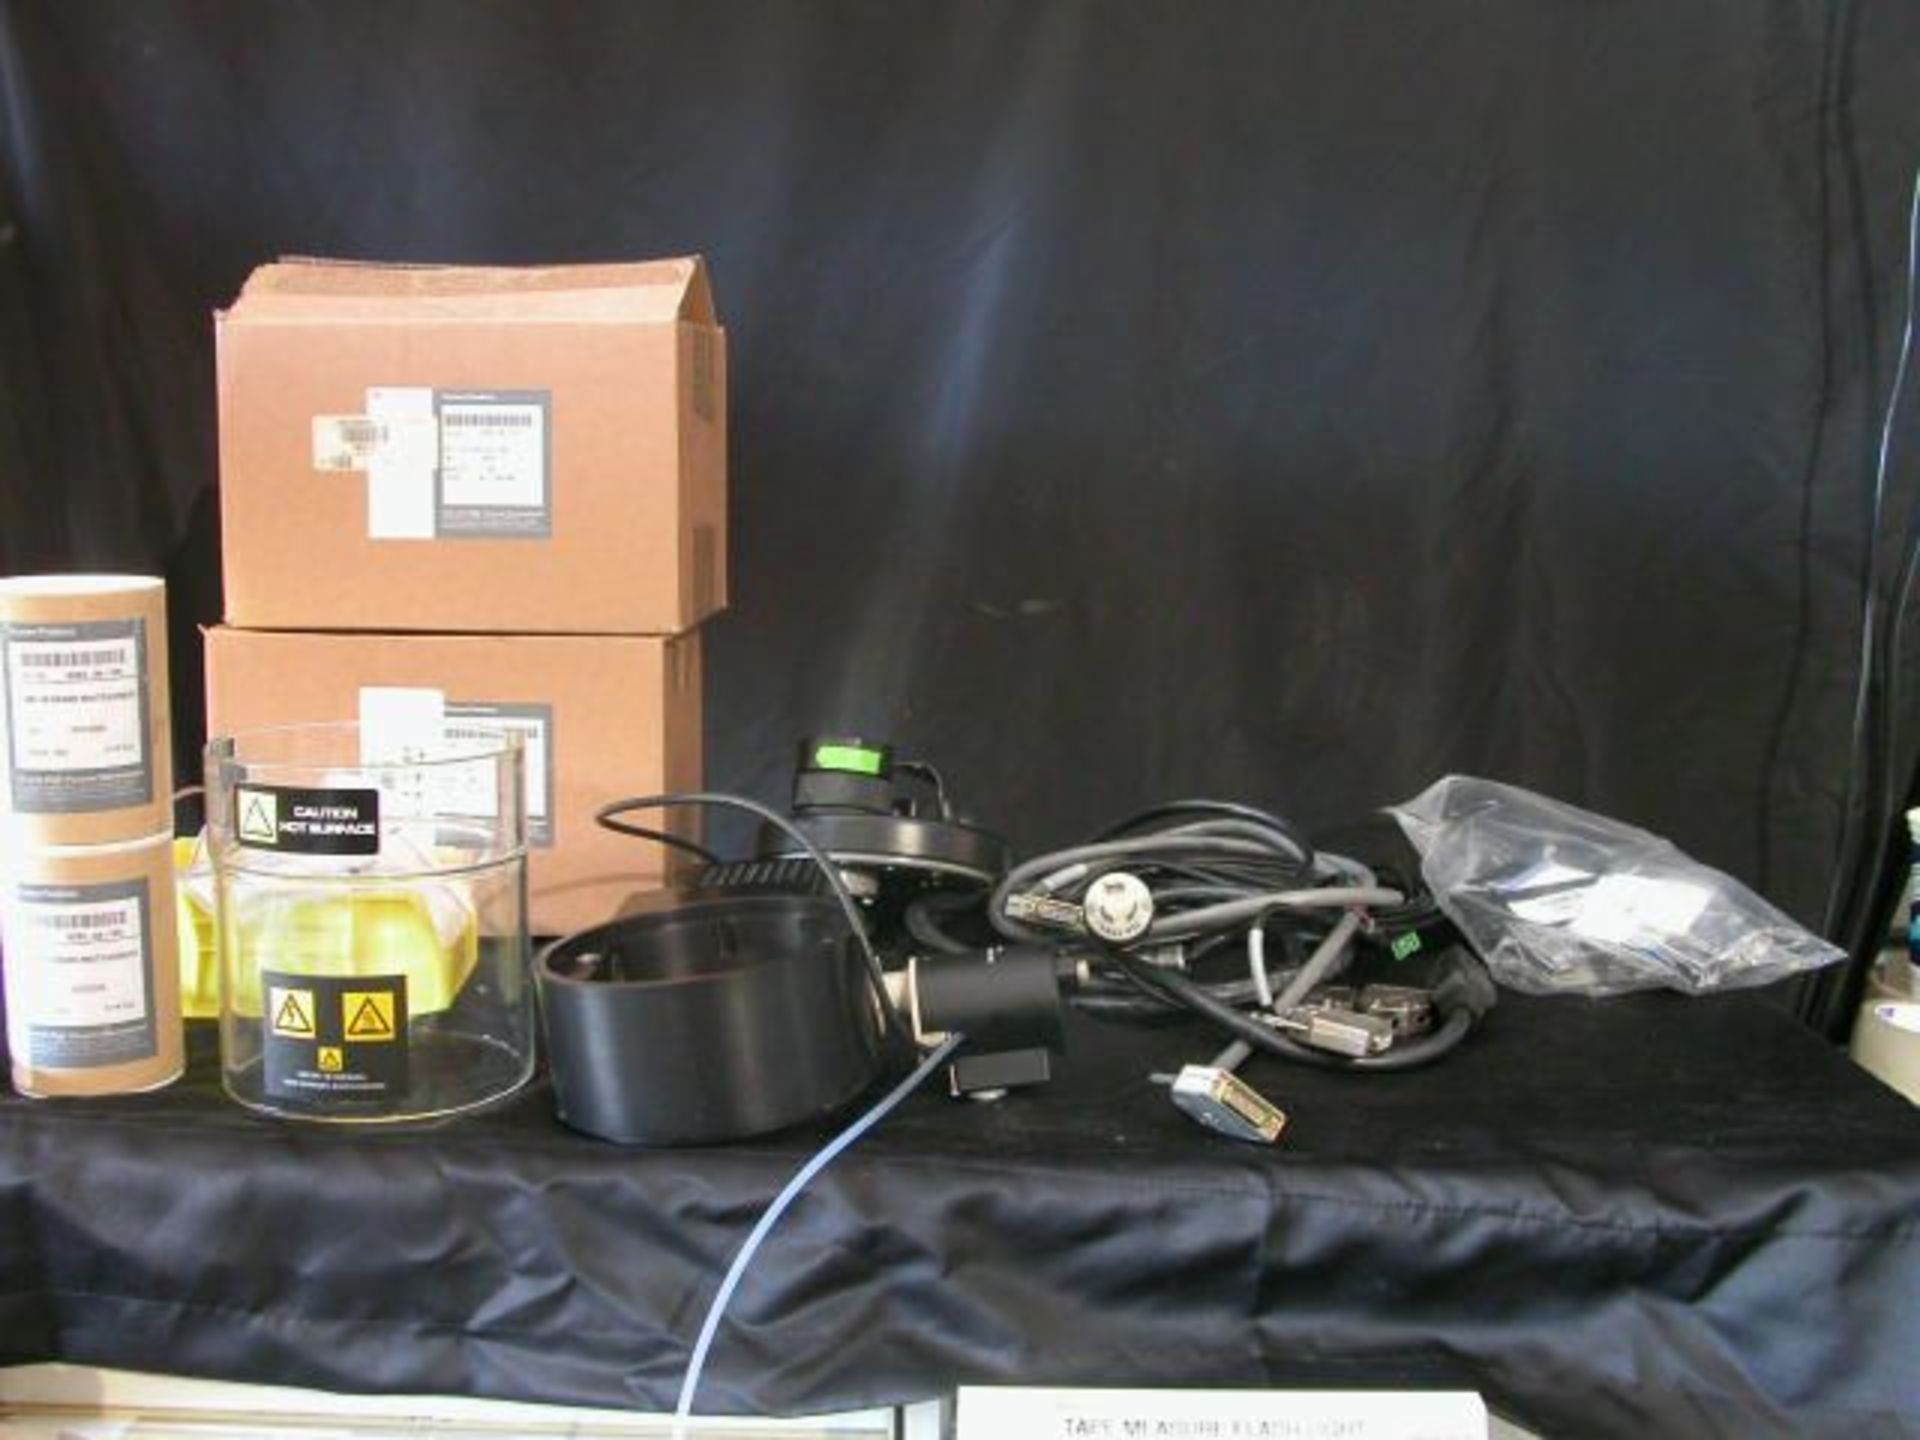 Waters/Micromass Q-Tof Ultima Mass Spectrometer P.M. KIT W/ Extras, Qty 1, 321118842113